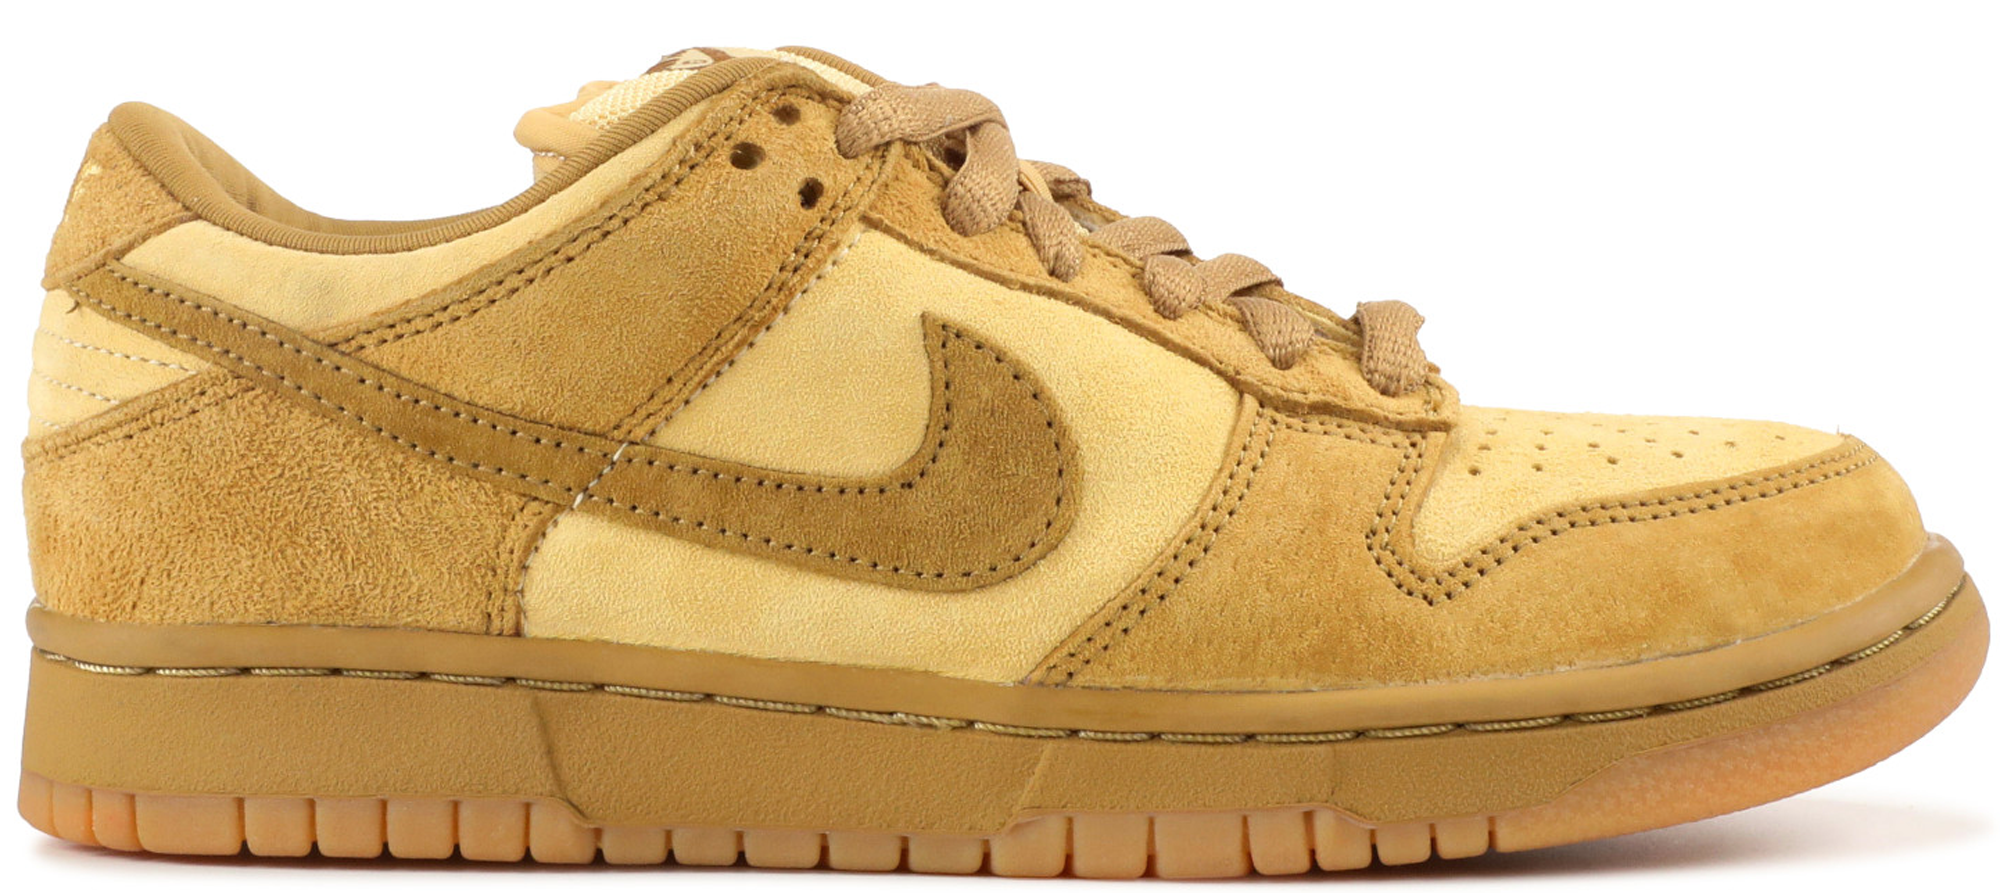 Nike SB Dunk Low Reese Forbes Wheat 